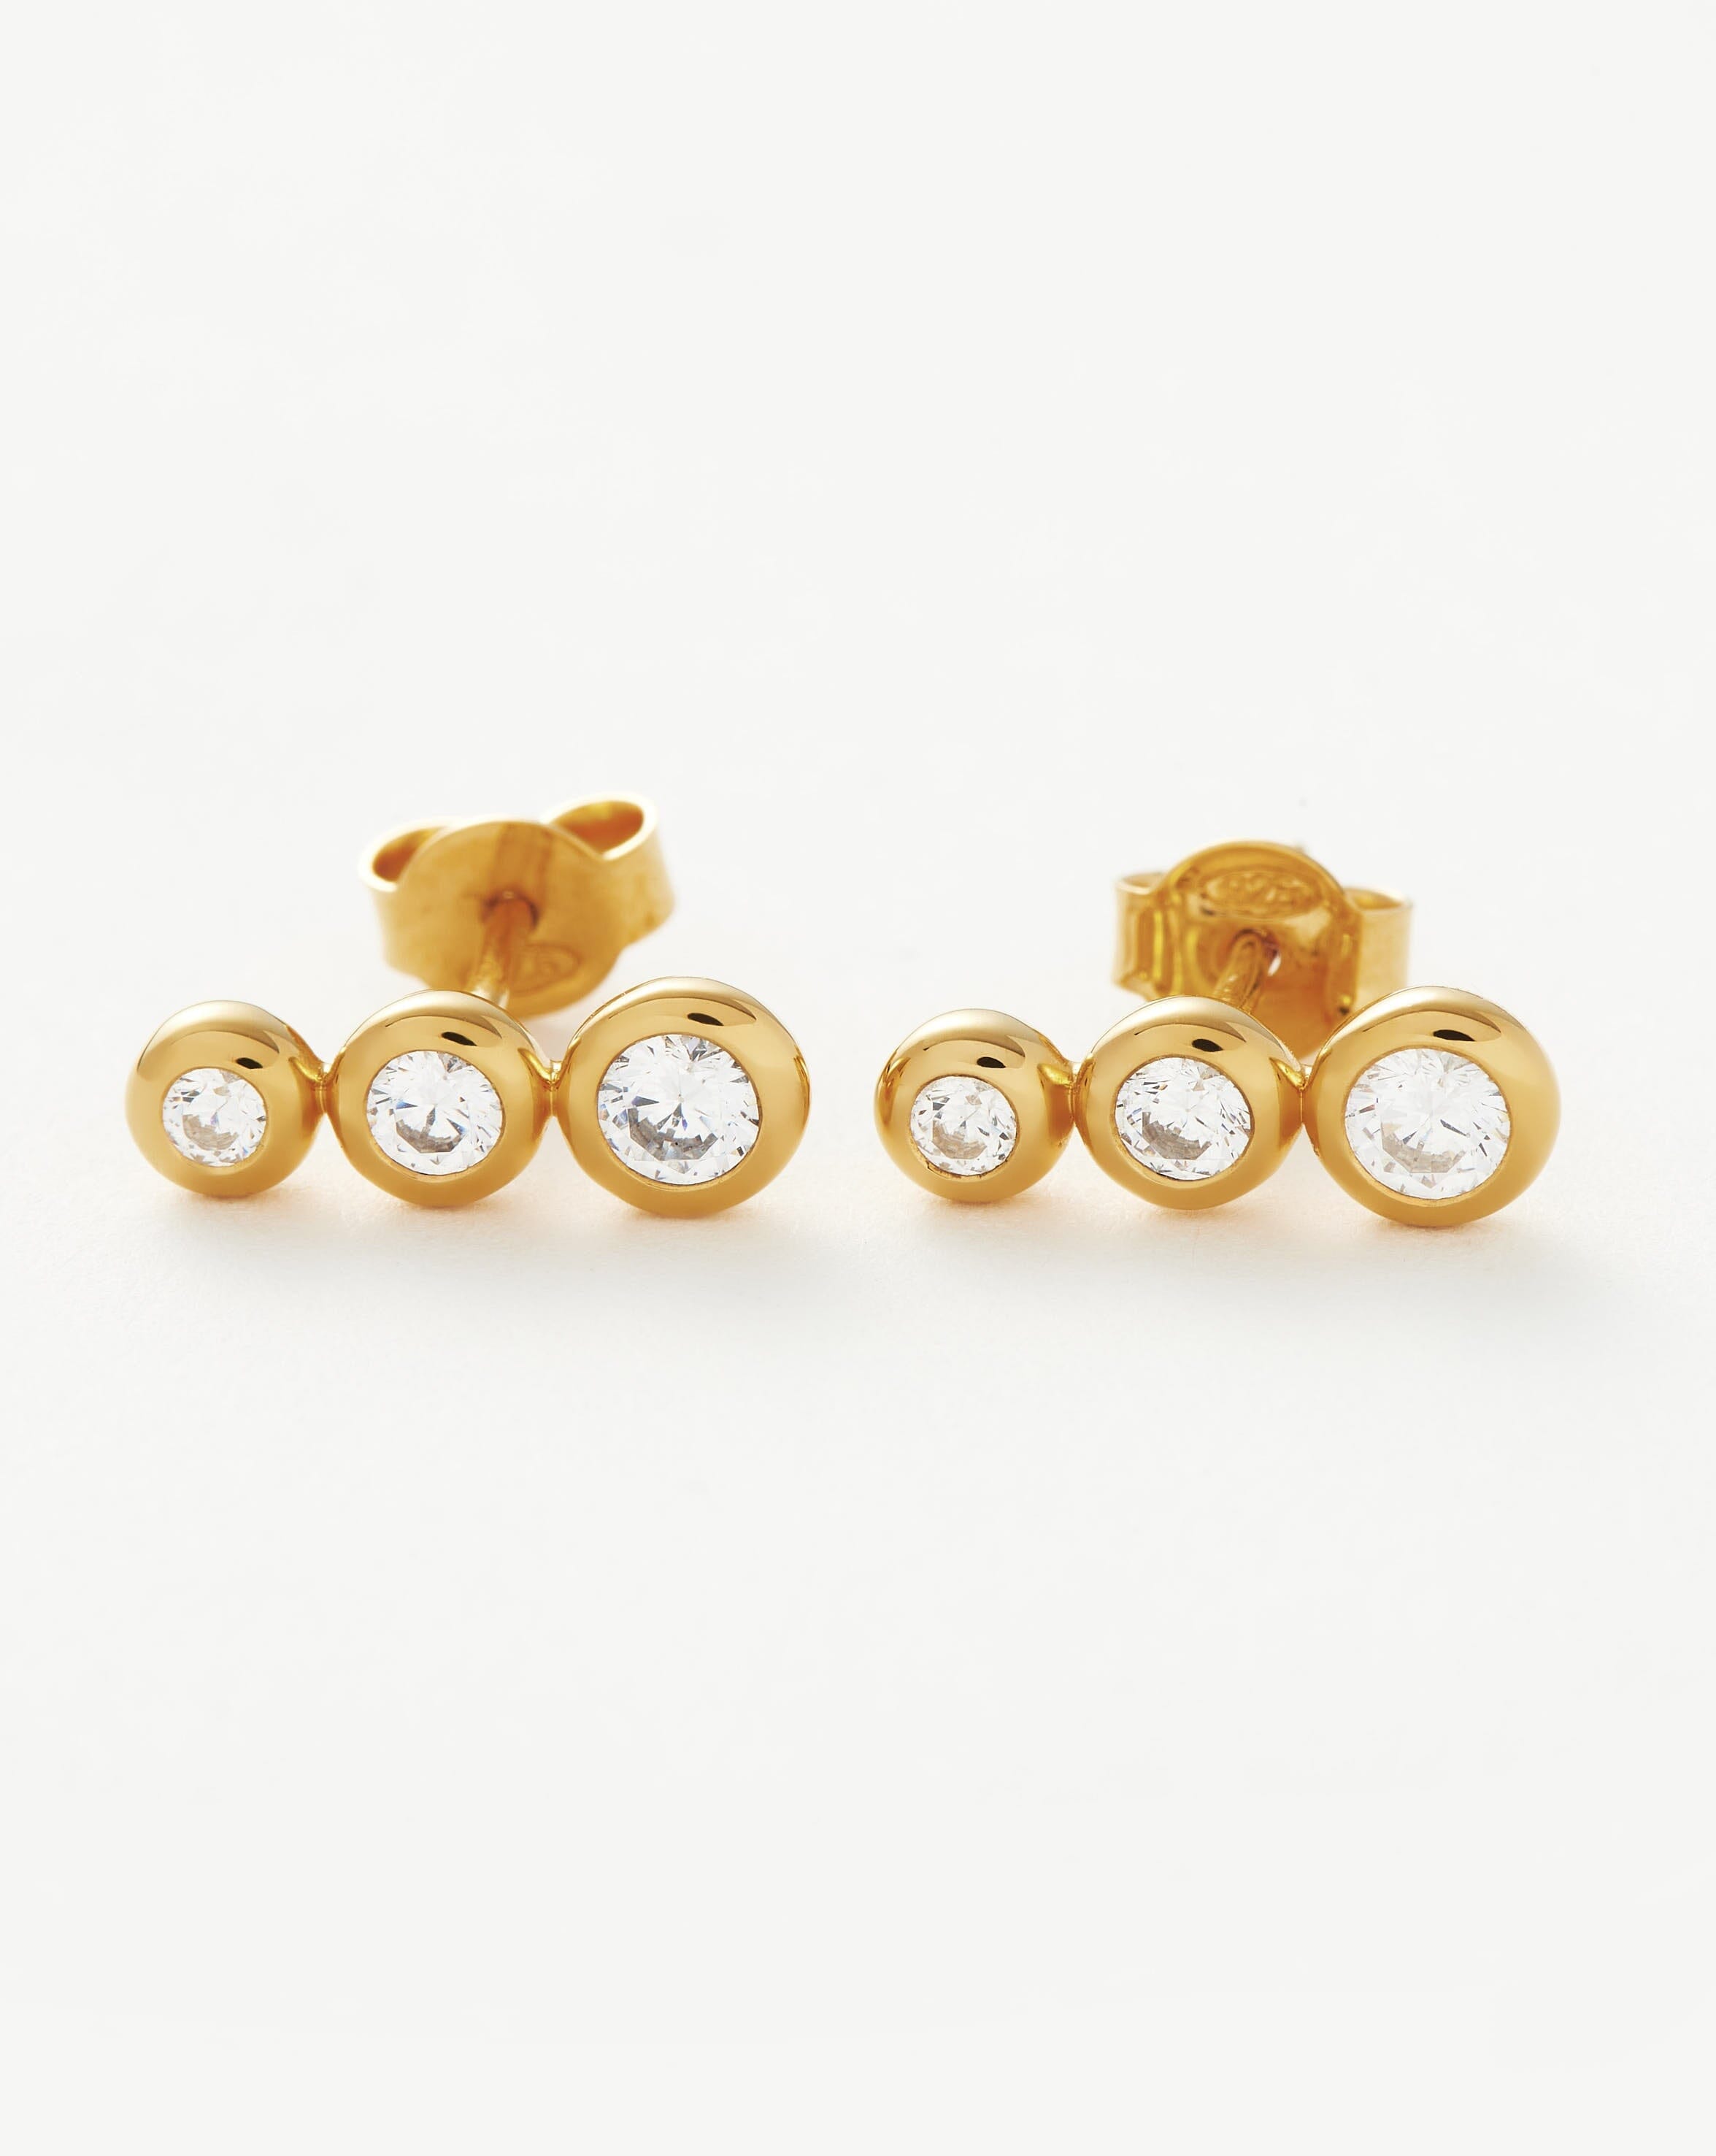 Articulated Triple Stone Stud Earrings | 18ct Gold Plated Vermeil/Cubic Zirconia Earrings Missoma 